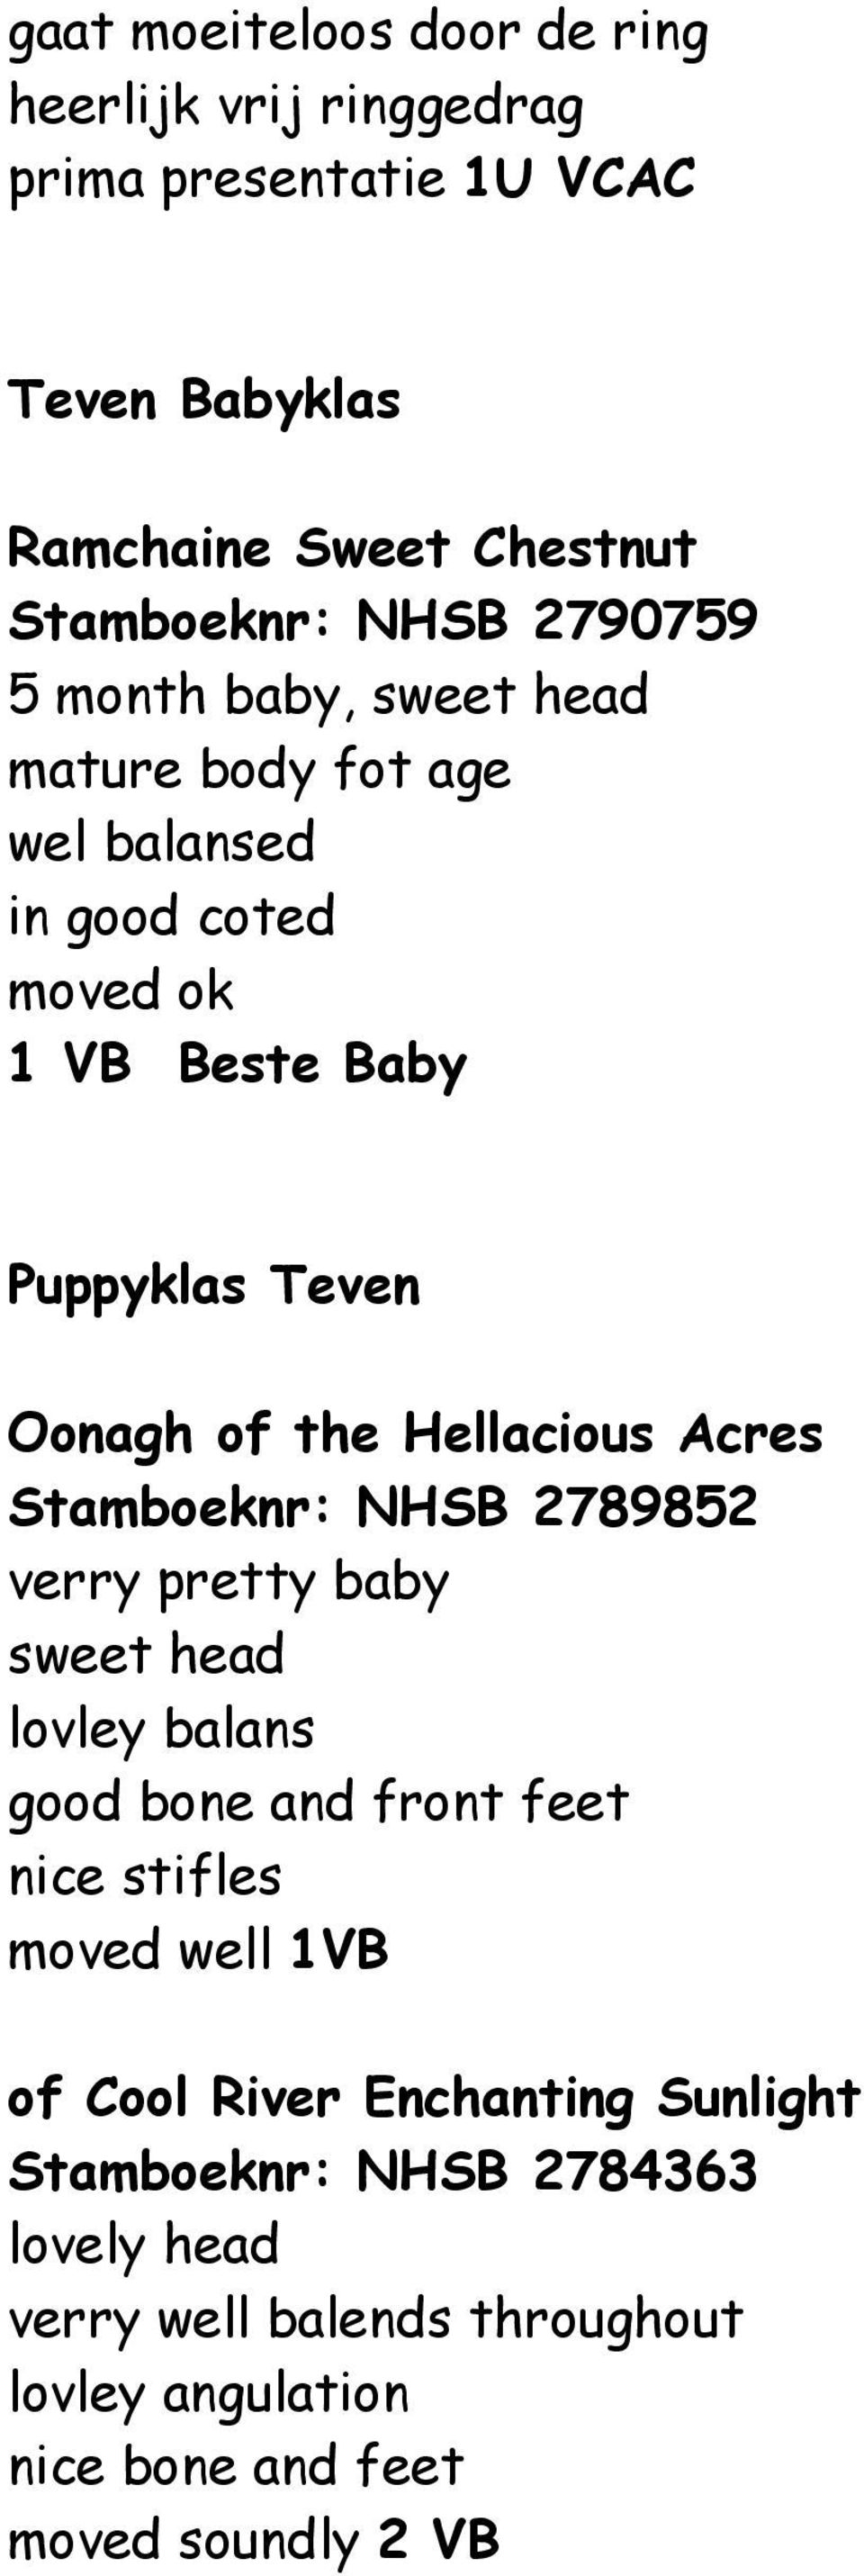 Hellacious Acres Stamboeknr: NHSB 2789852 verry pretty baby sweet head lovley balans good bone and front feet nice stifles moved well 1VB of